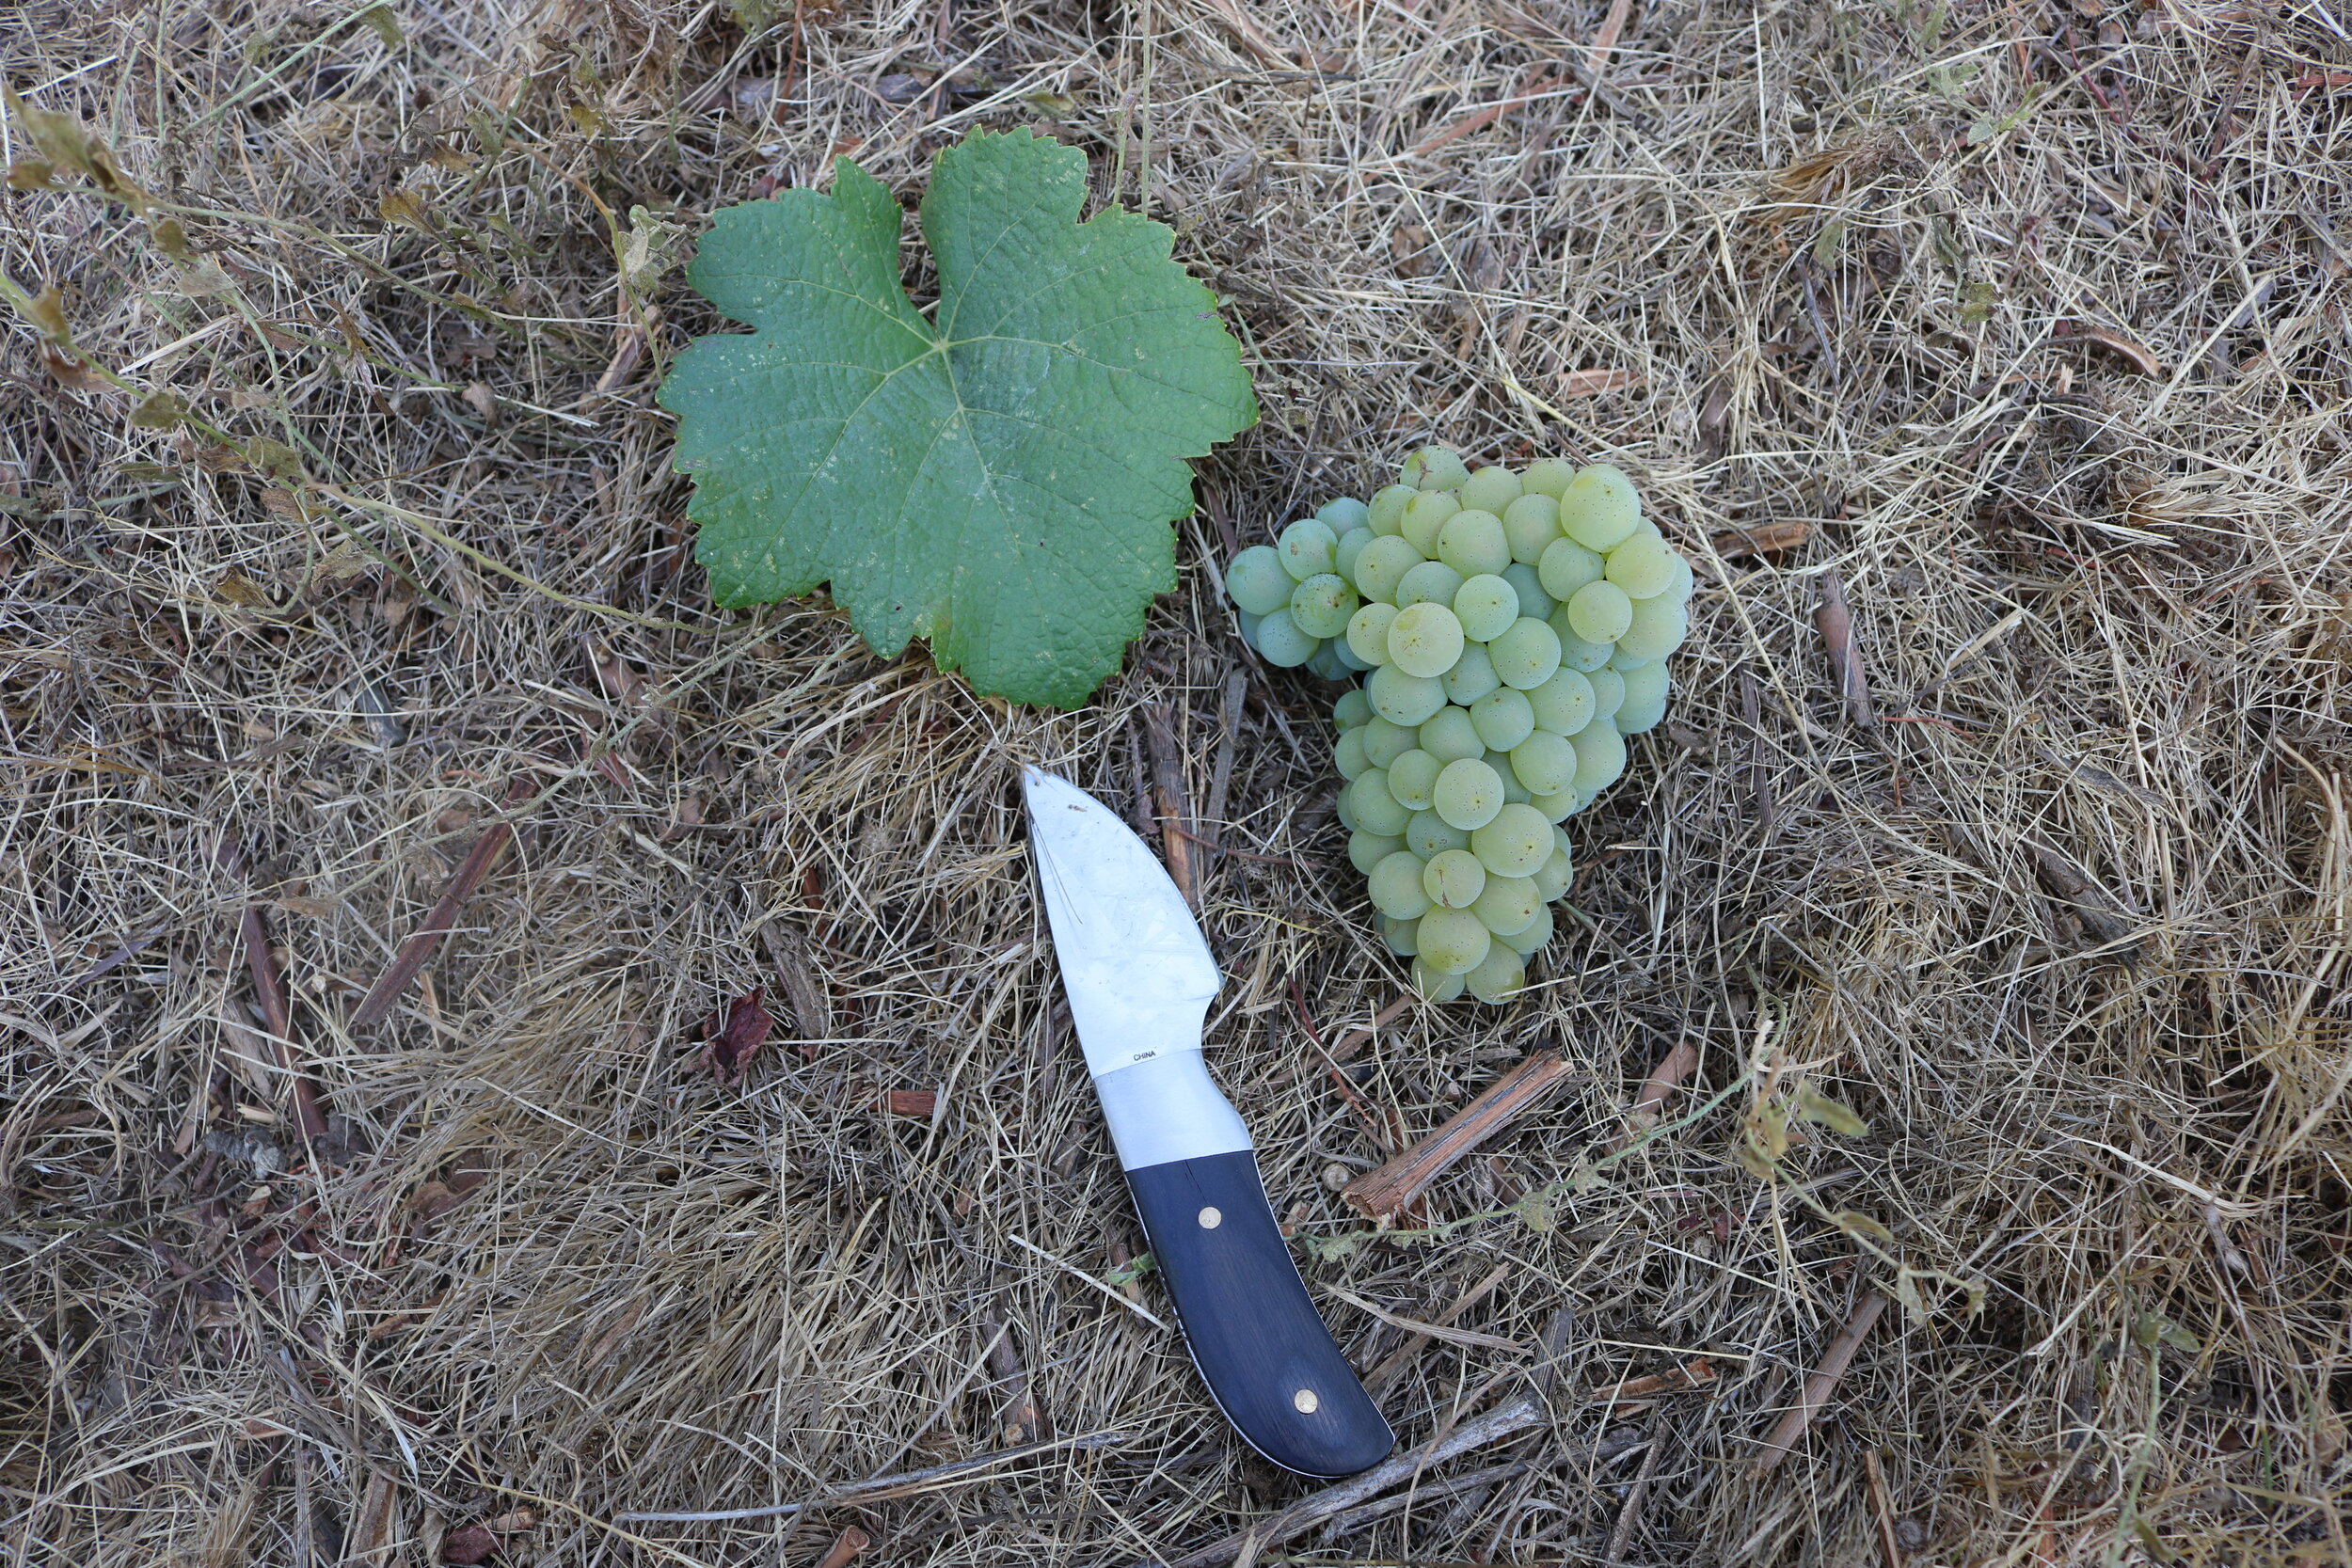 White grape cluster and leaf with knife on the ground